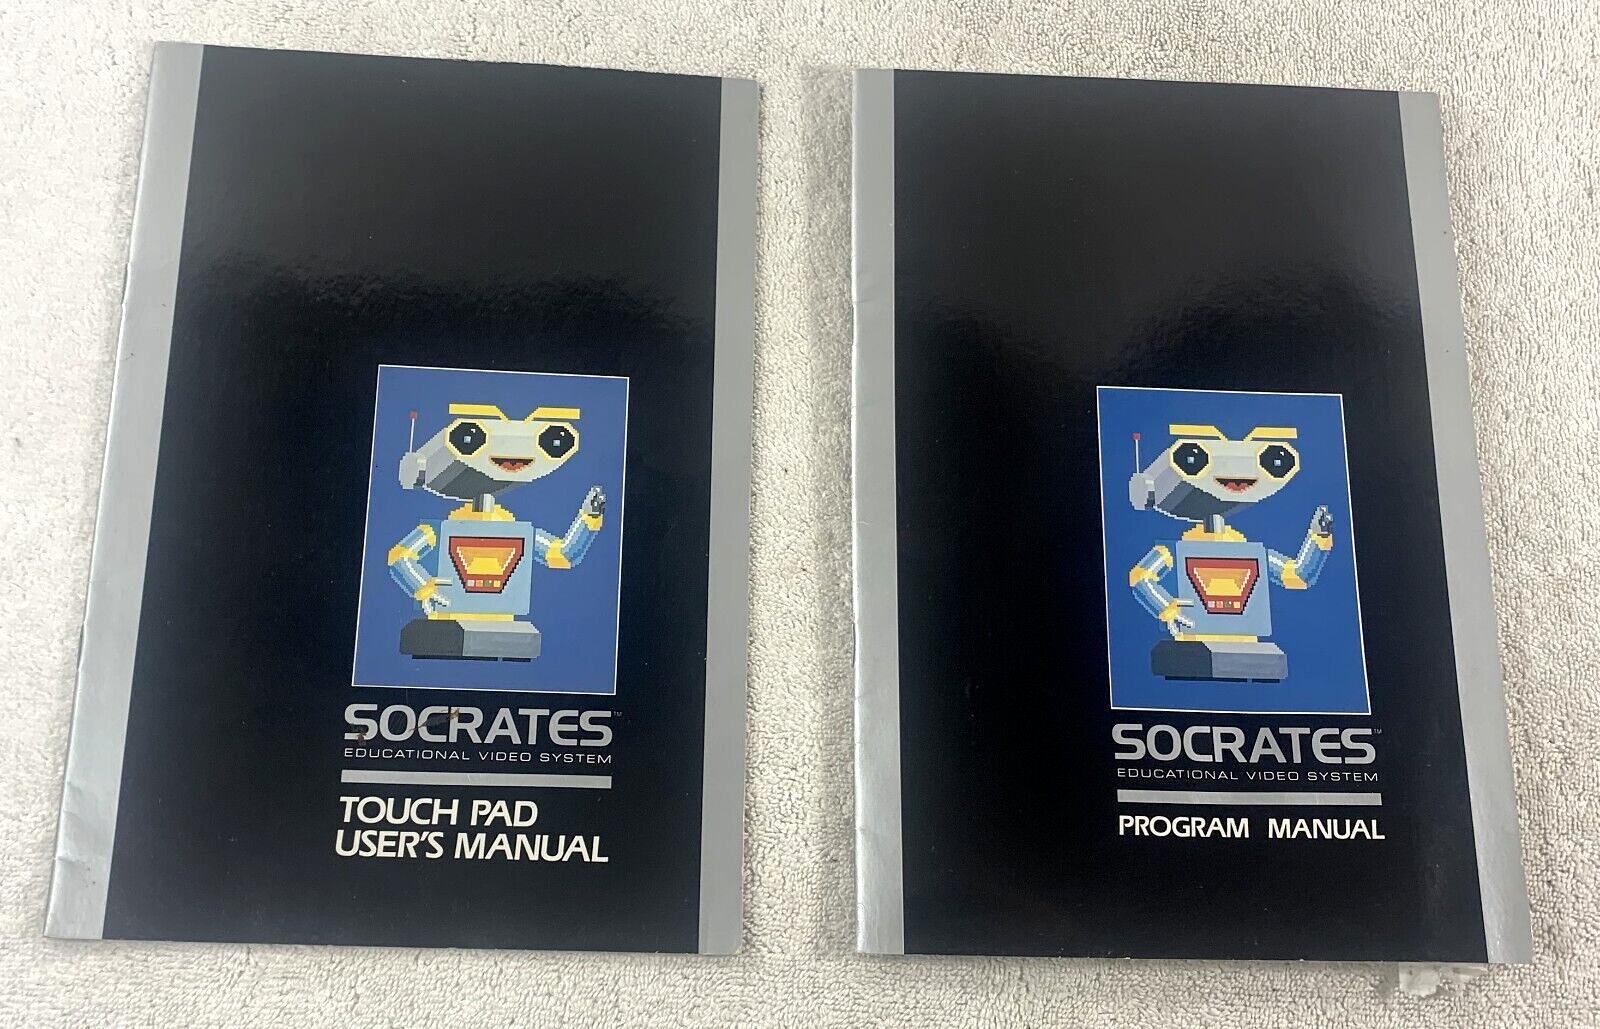 Socrates Educational Video System Program & Touch Pad Manual 1988 - READ